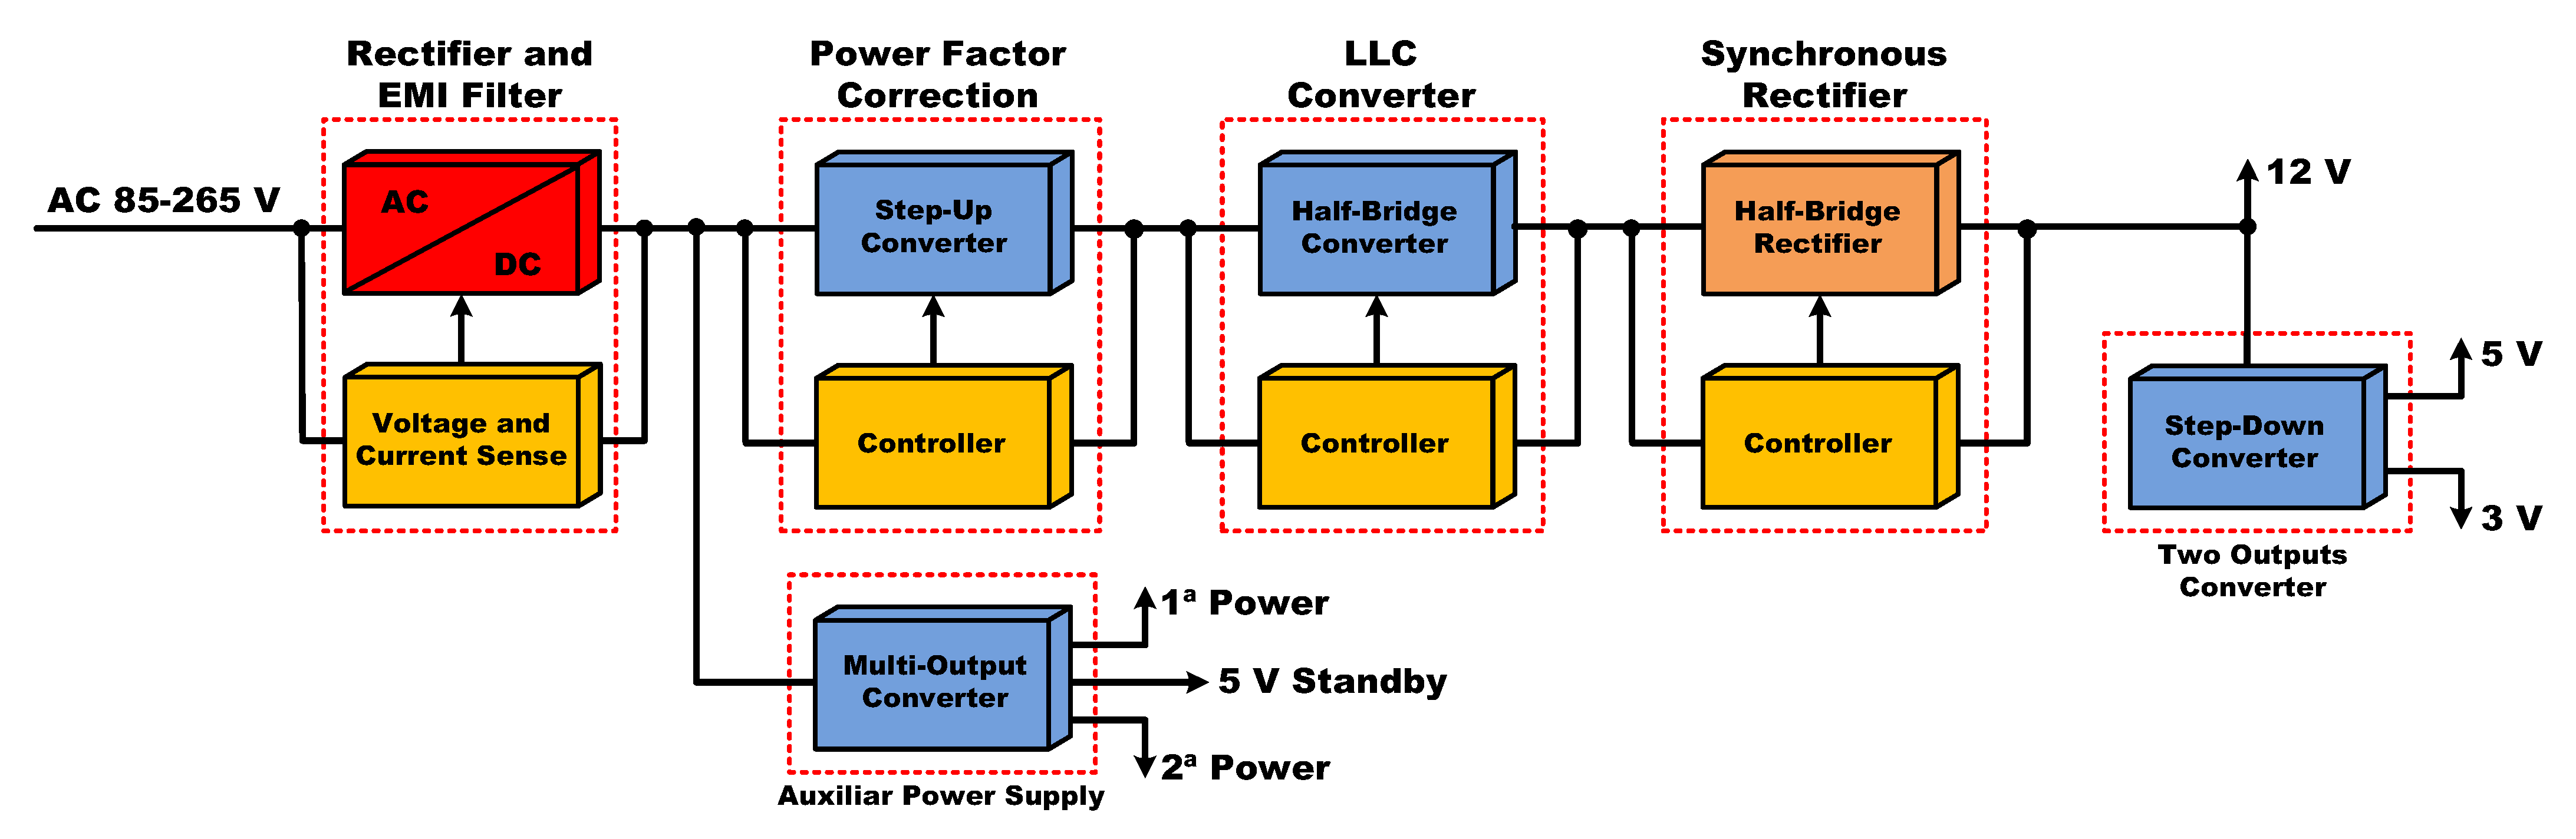 power supply - Buck Converter Output Is Coming To More Than The Designed  Value After 3 Or 4 Months In Some Boards - Electrical Engineering Stack  Exchange